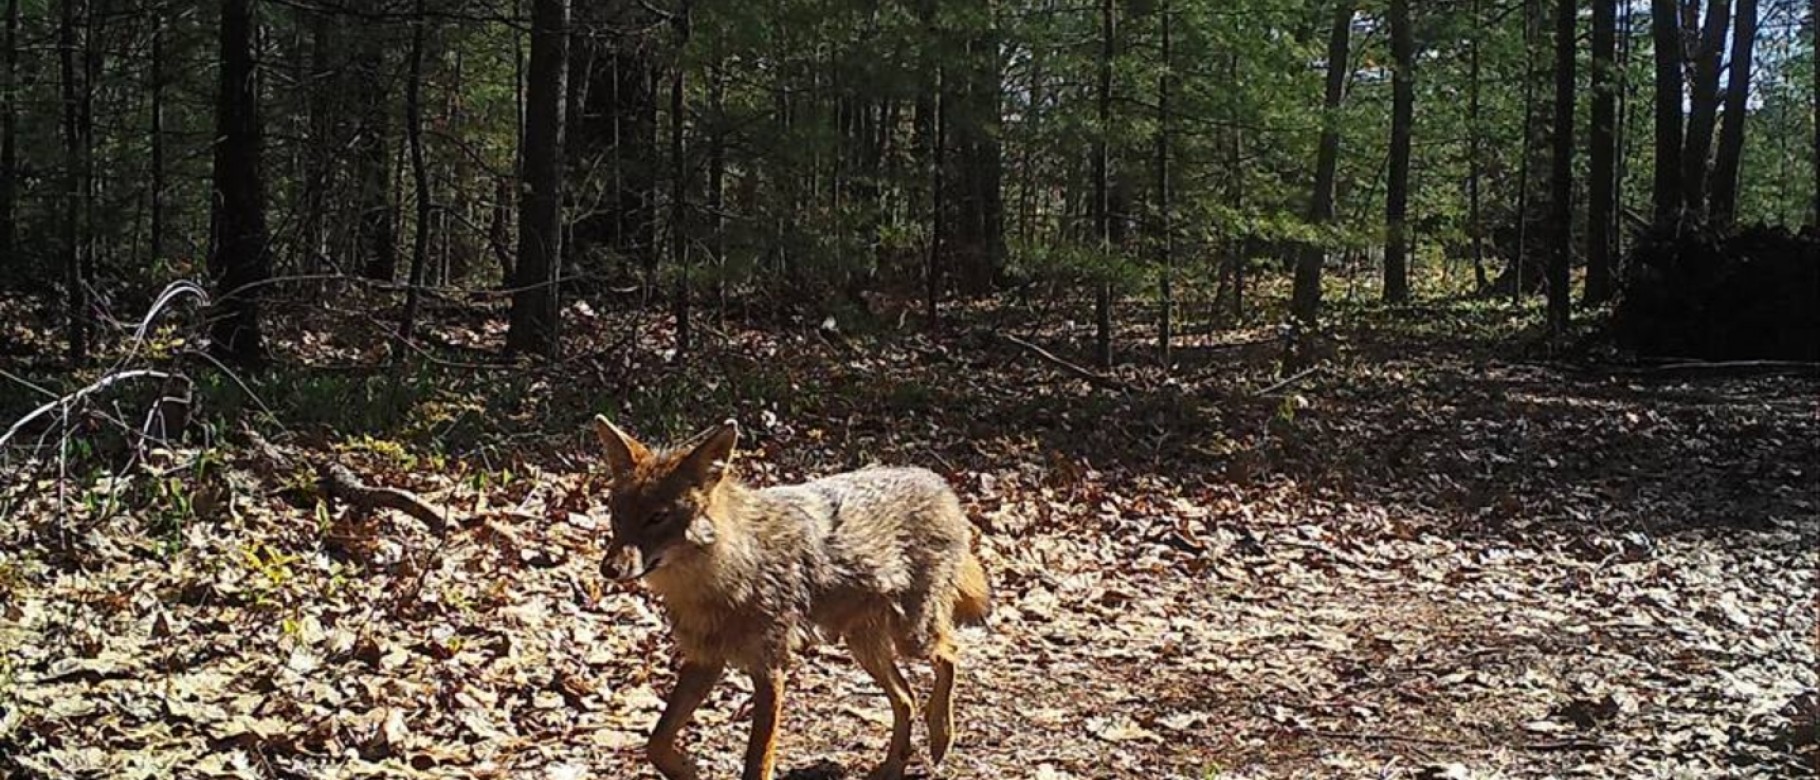 Noah Perlut's remote cameras captured this image of a coyote near the Eastern Trail gap